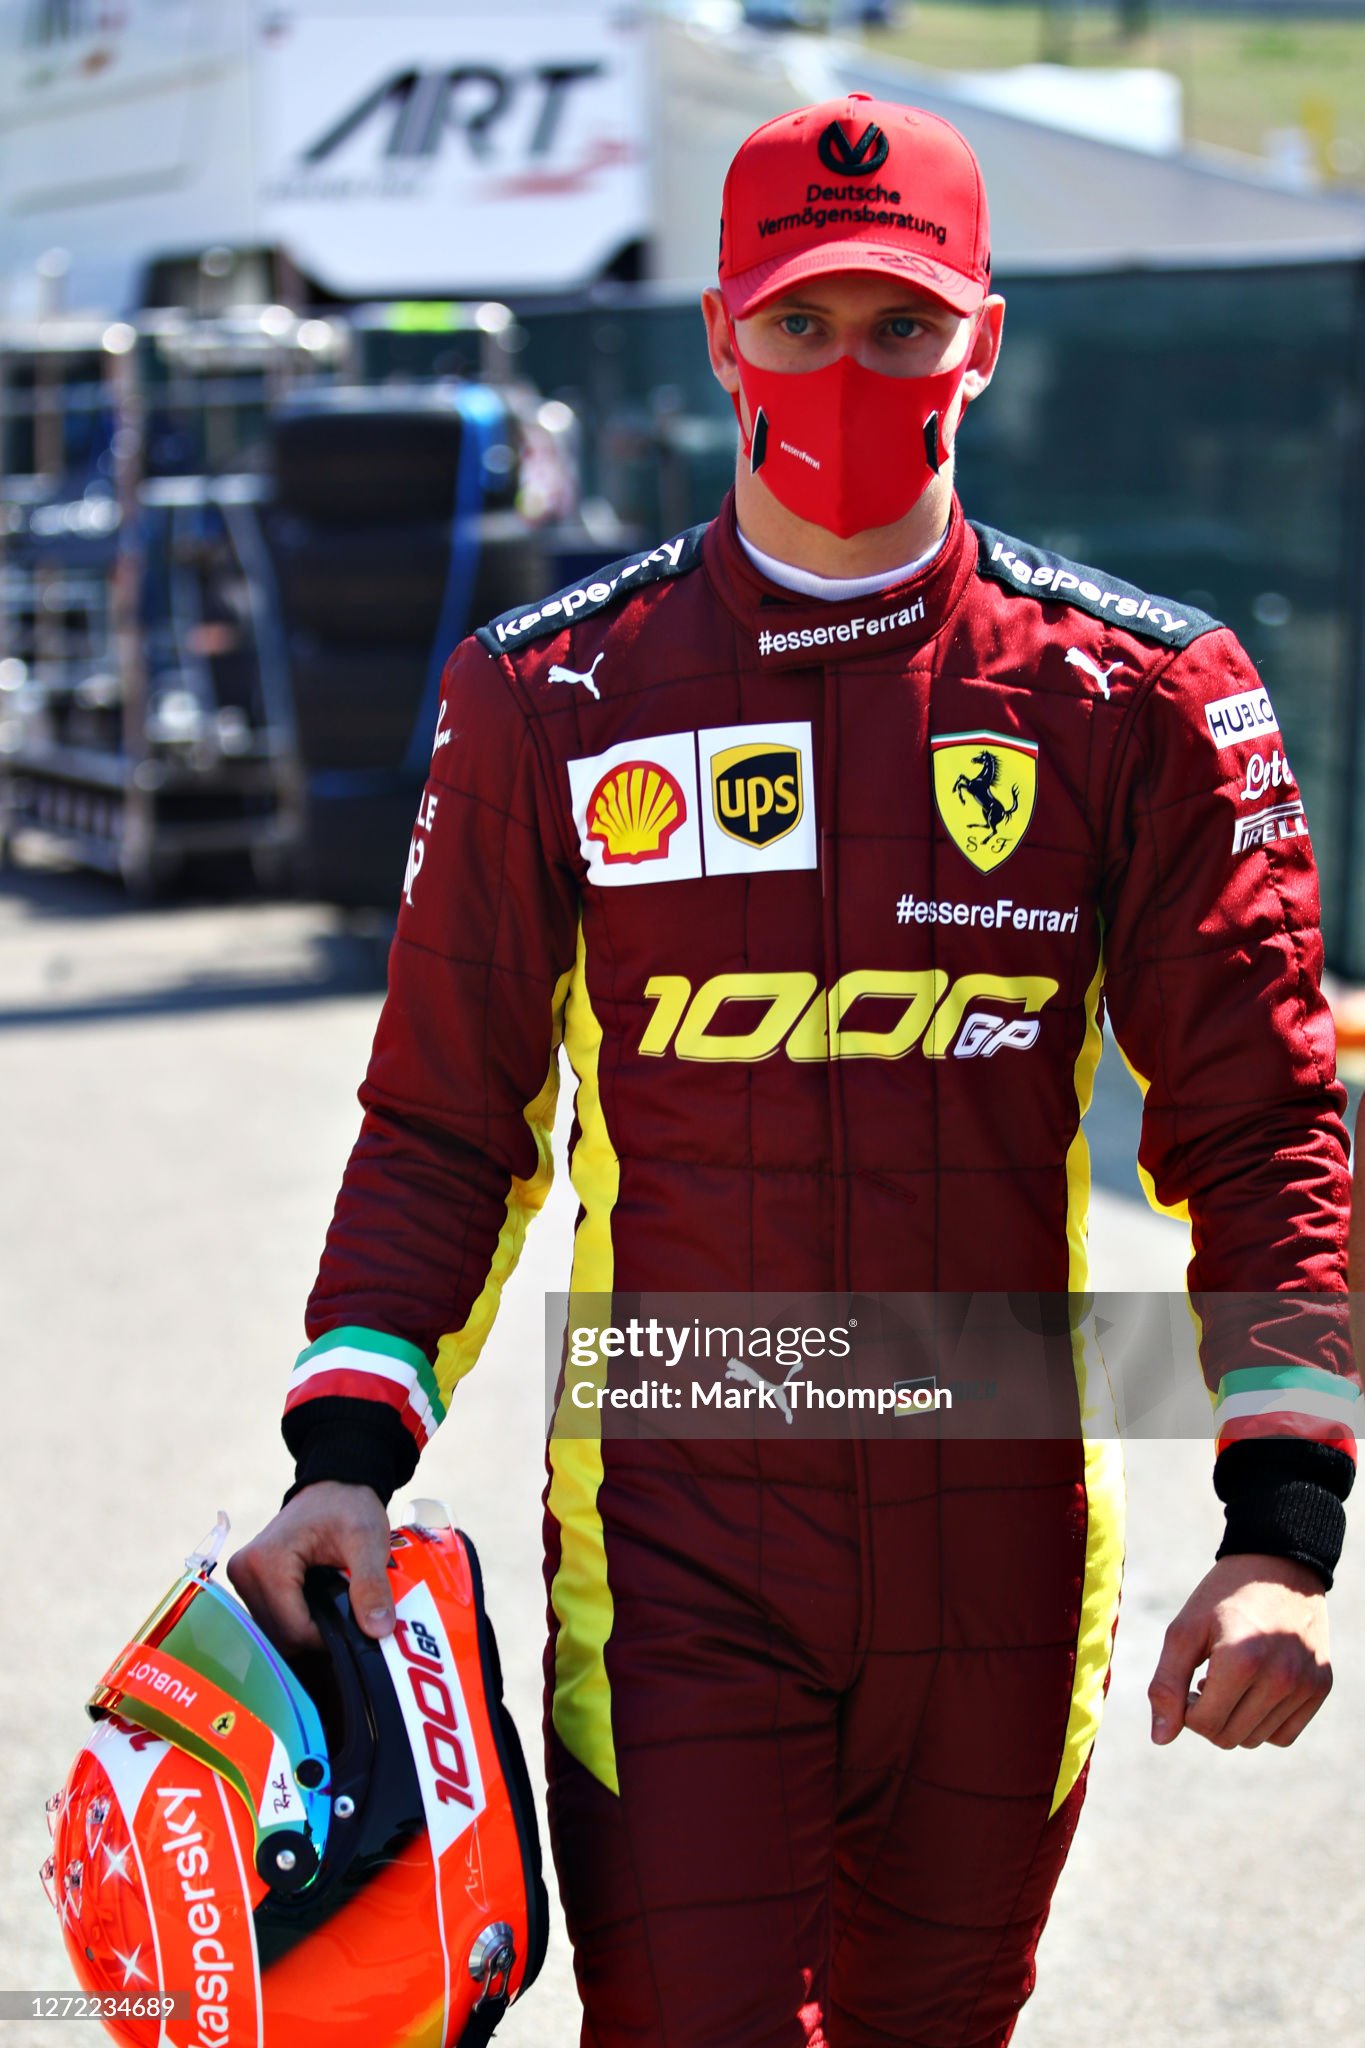 Mick Schumacher of Germany prepares to drive the Ferrari F2004 of his father Michael Schumacher before the F1 Grand Prix of Tuscany at Mugello Circuit on 13 September 2020 in Scarperia, Italy. 